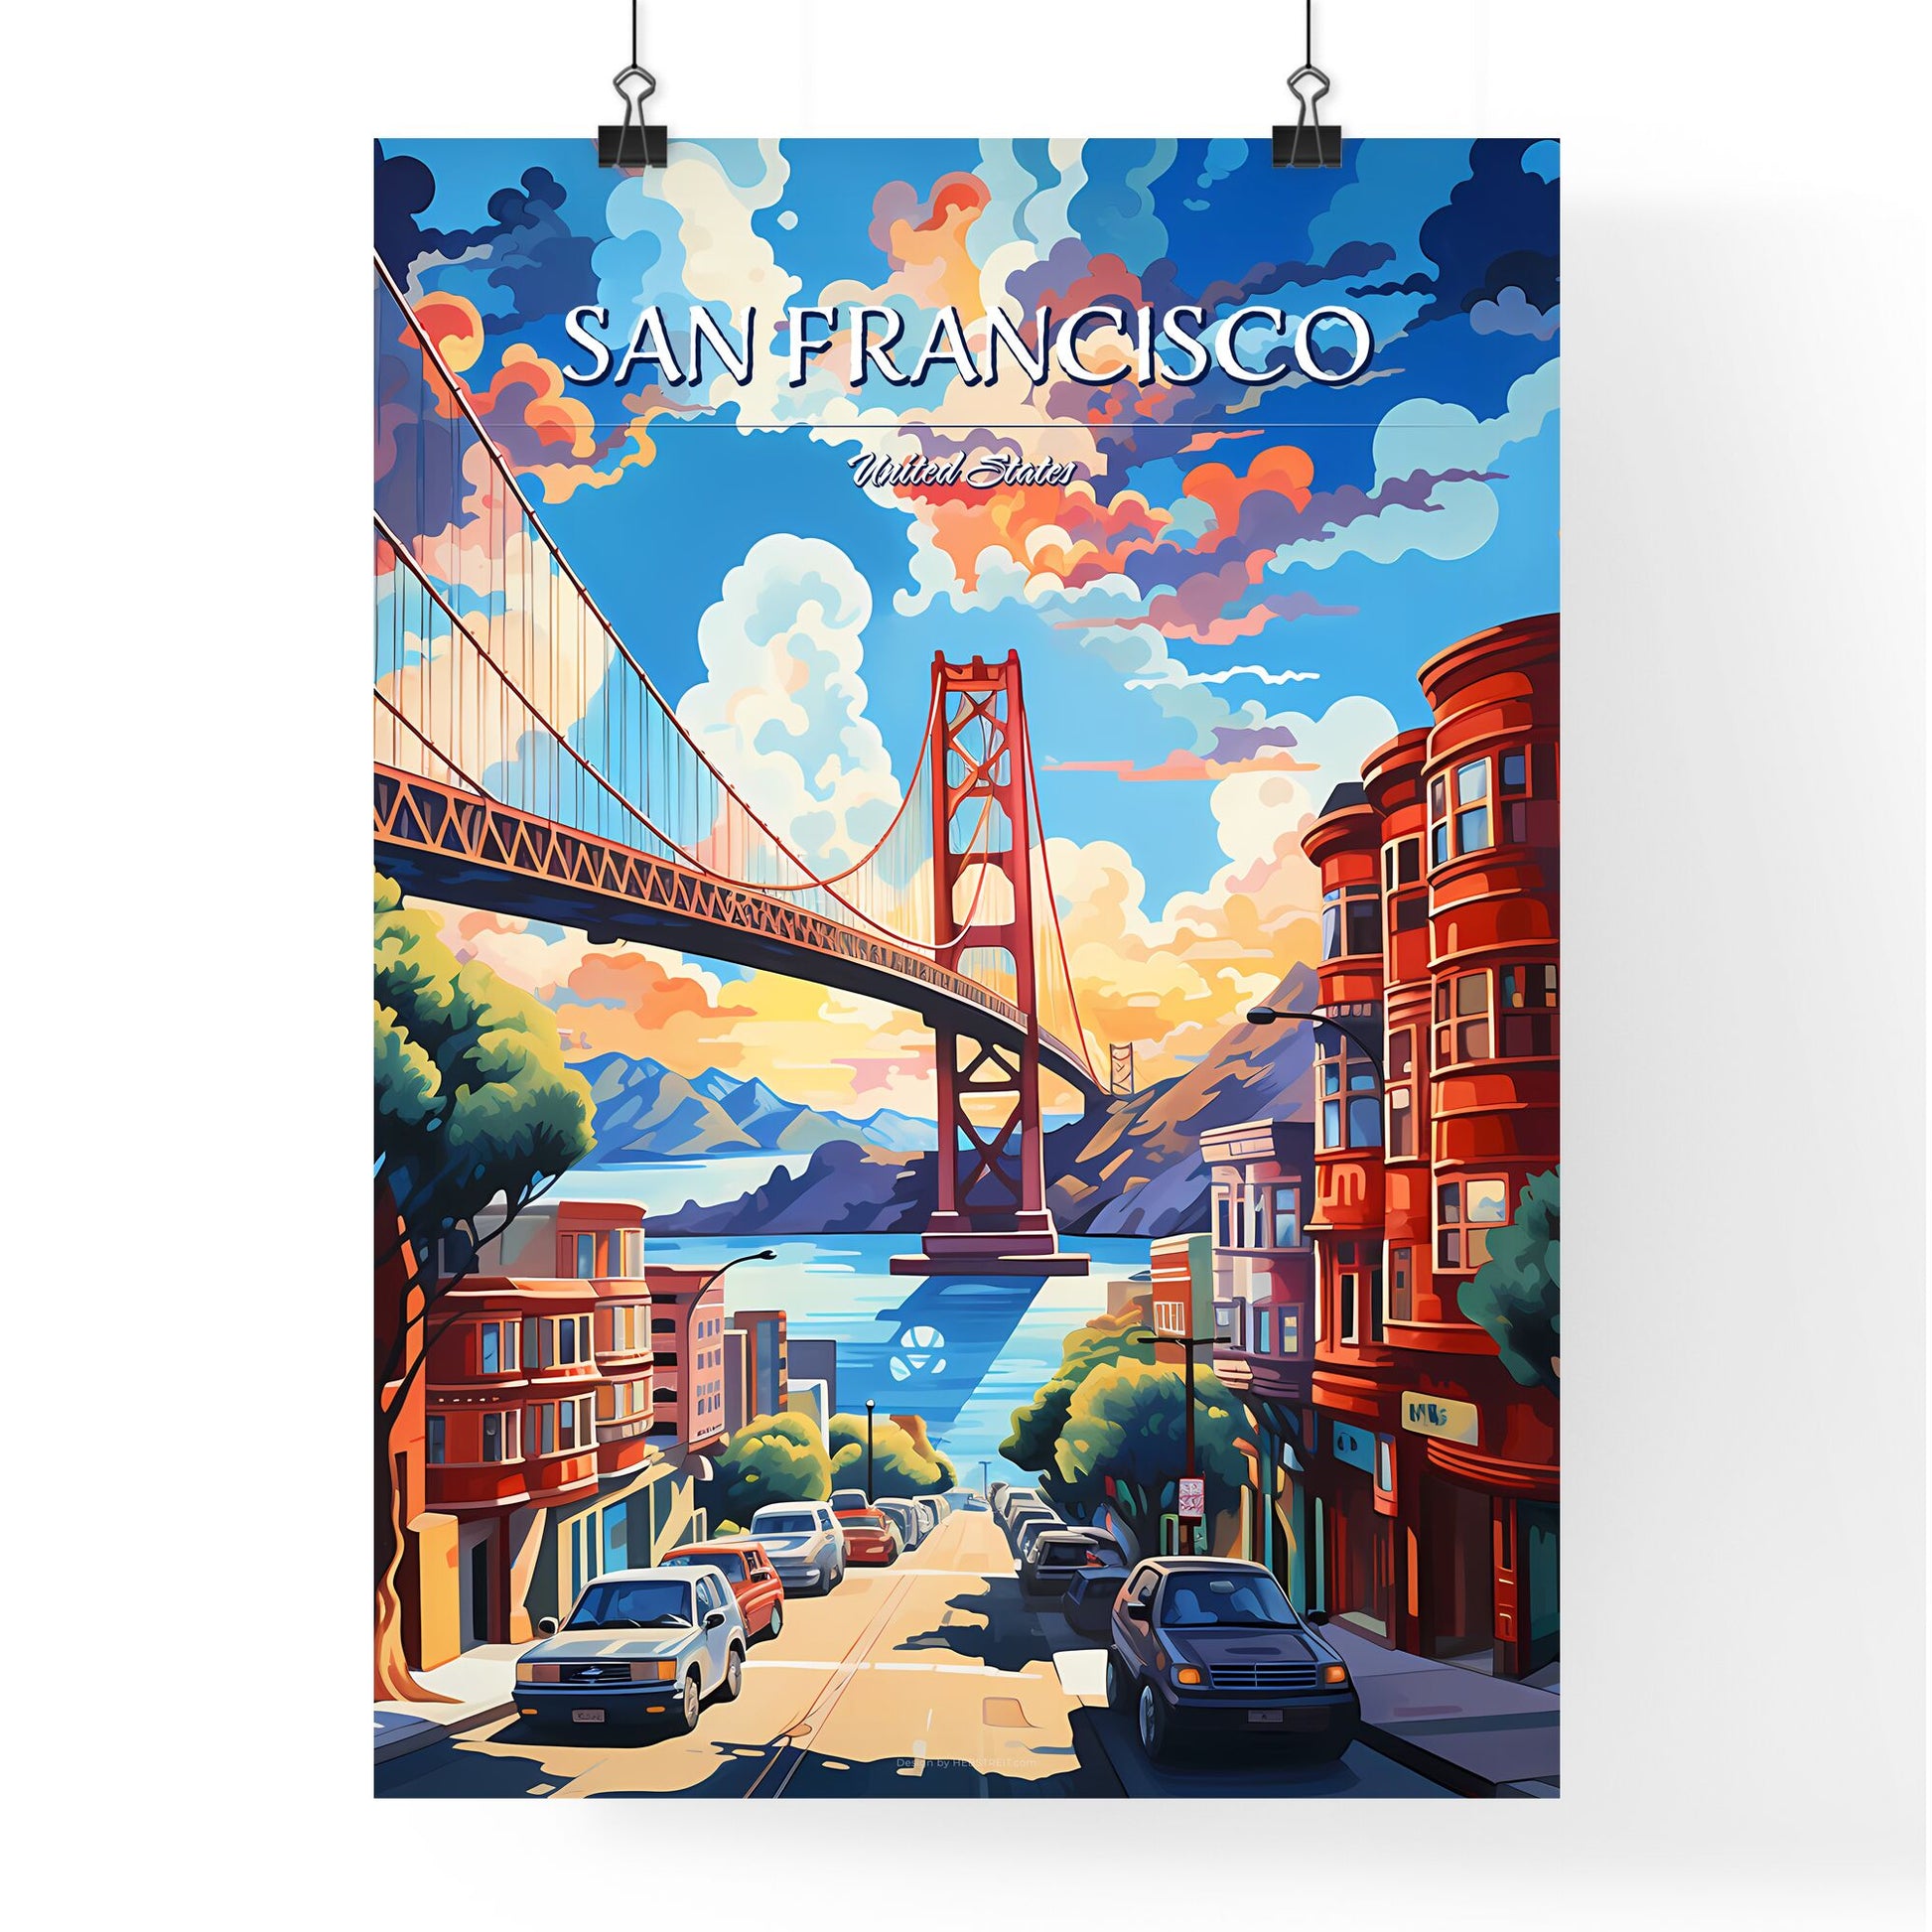 San Francisco - Art print of a bridge over water in a city Default Title